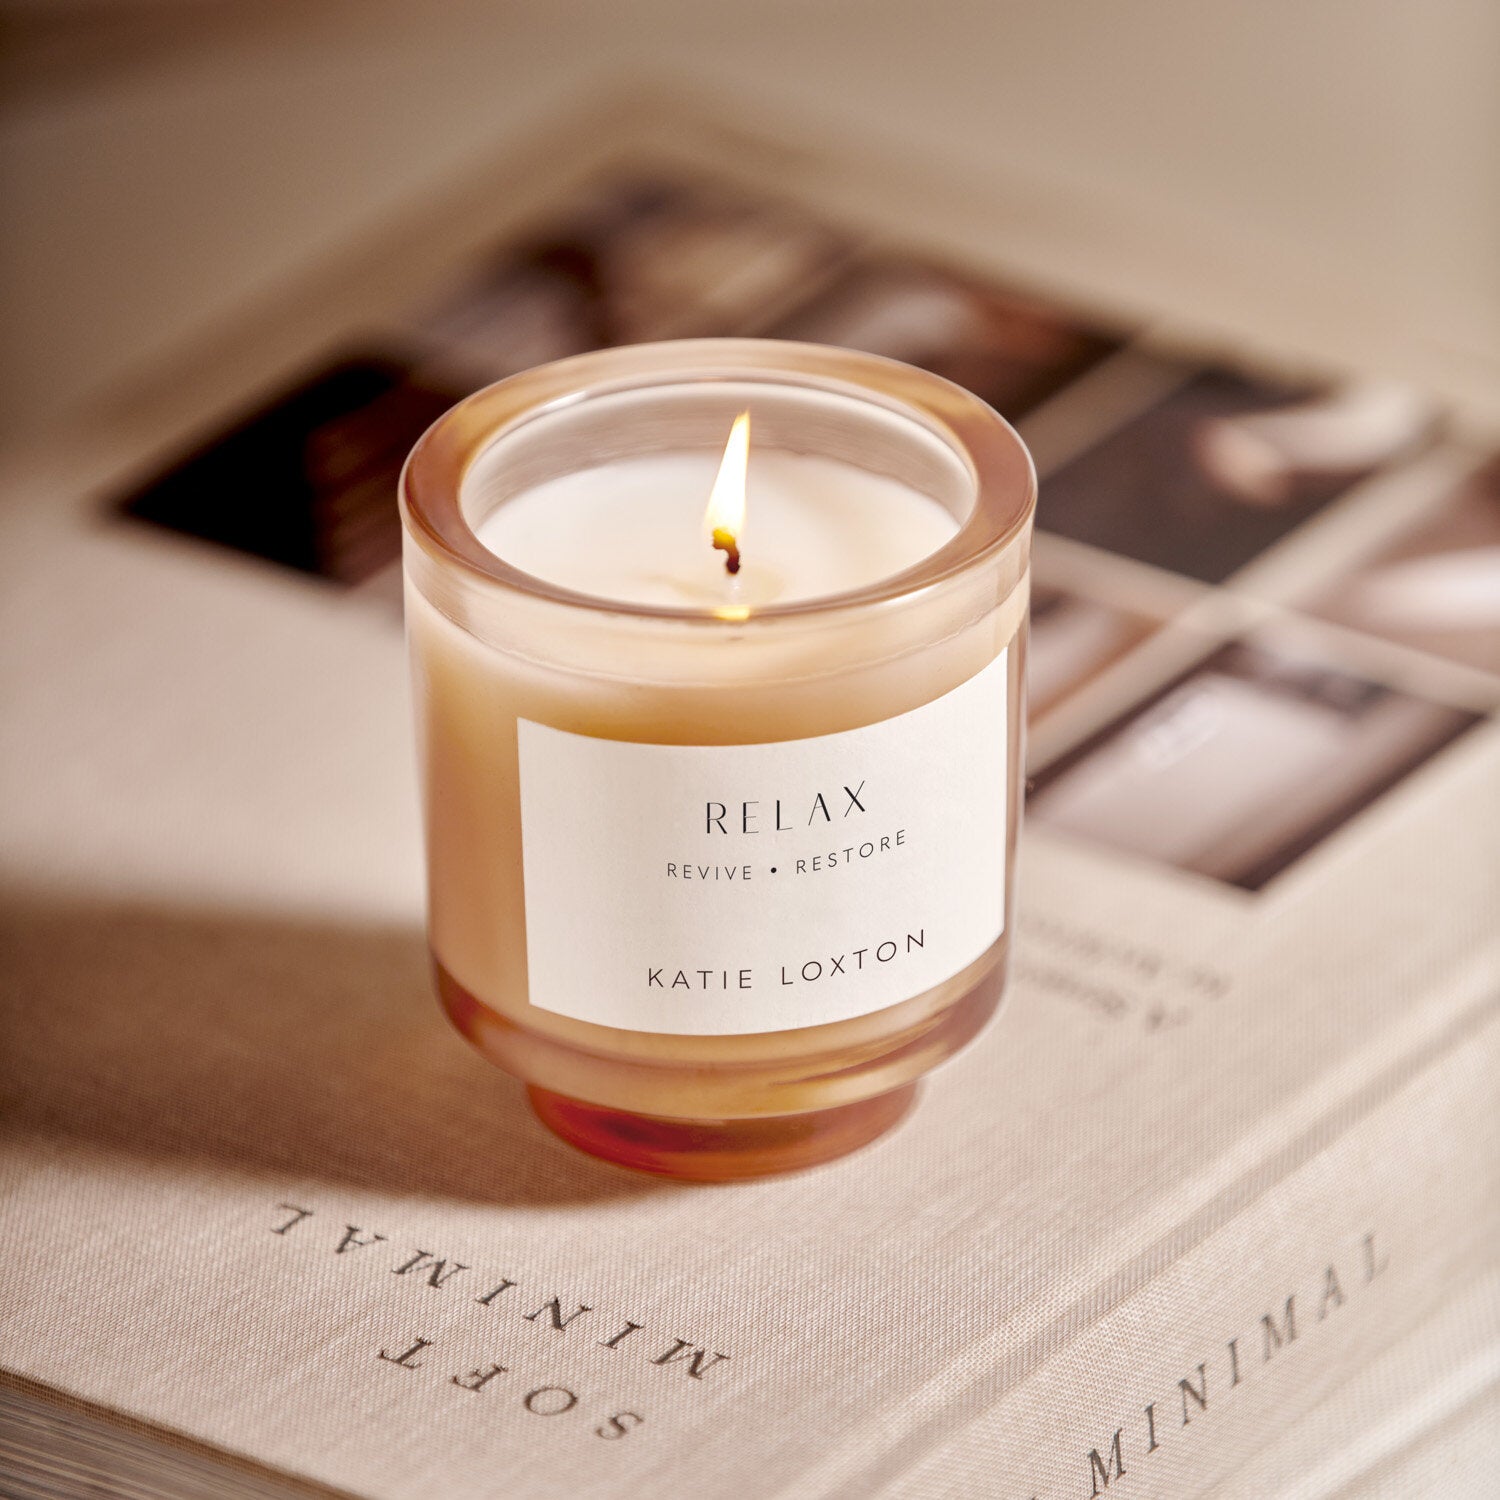 Sentiment Candle 'Relax' - Katie Loxton